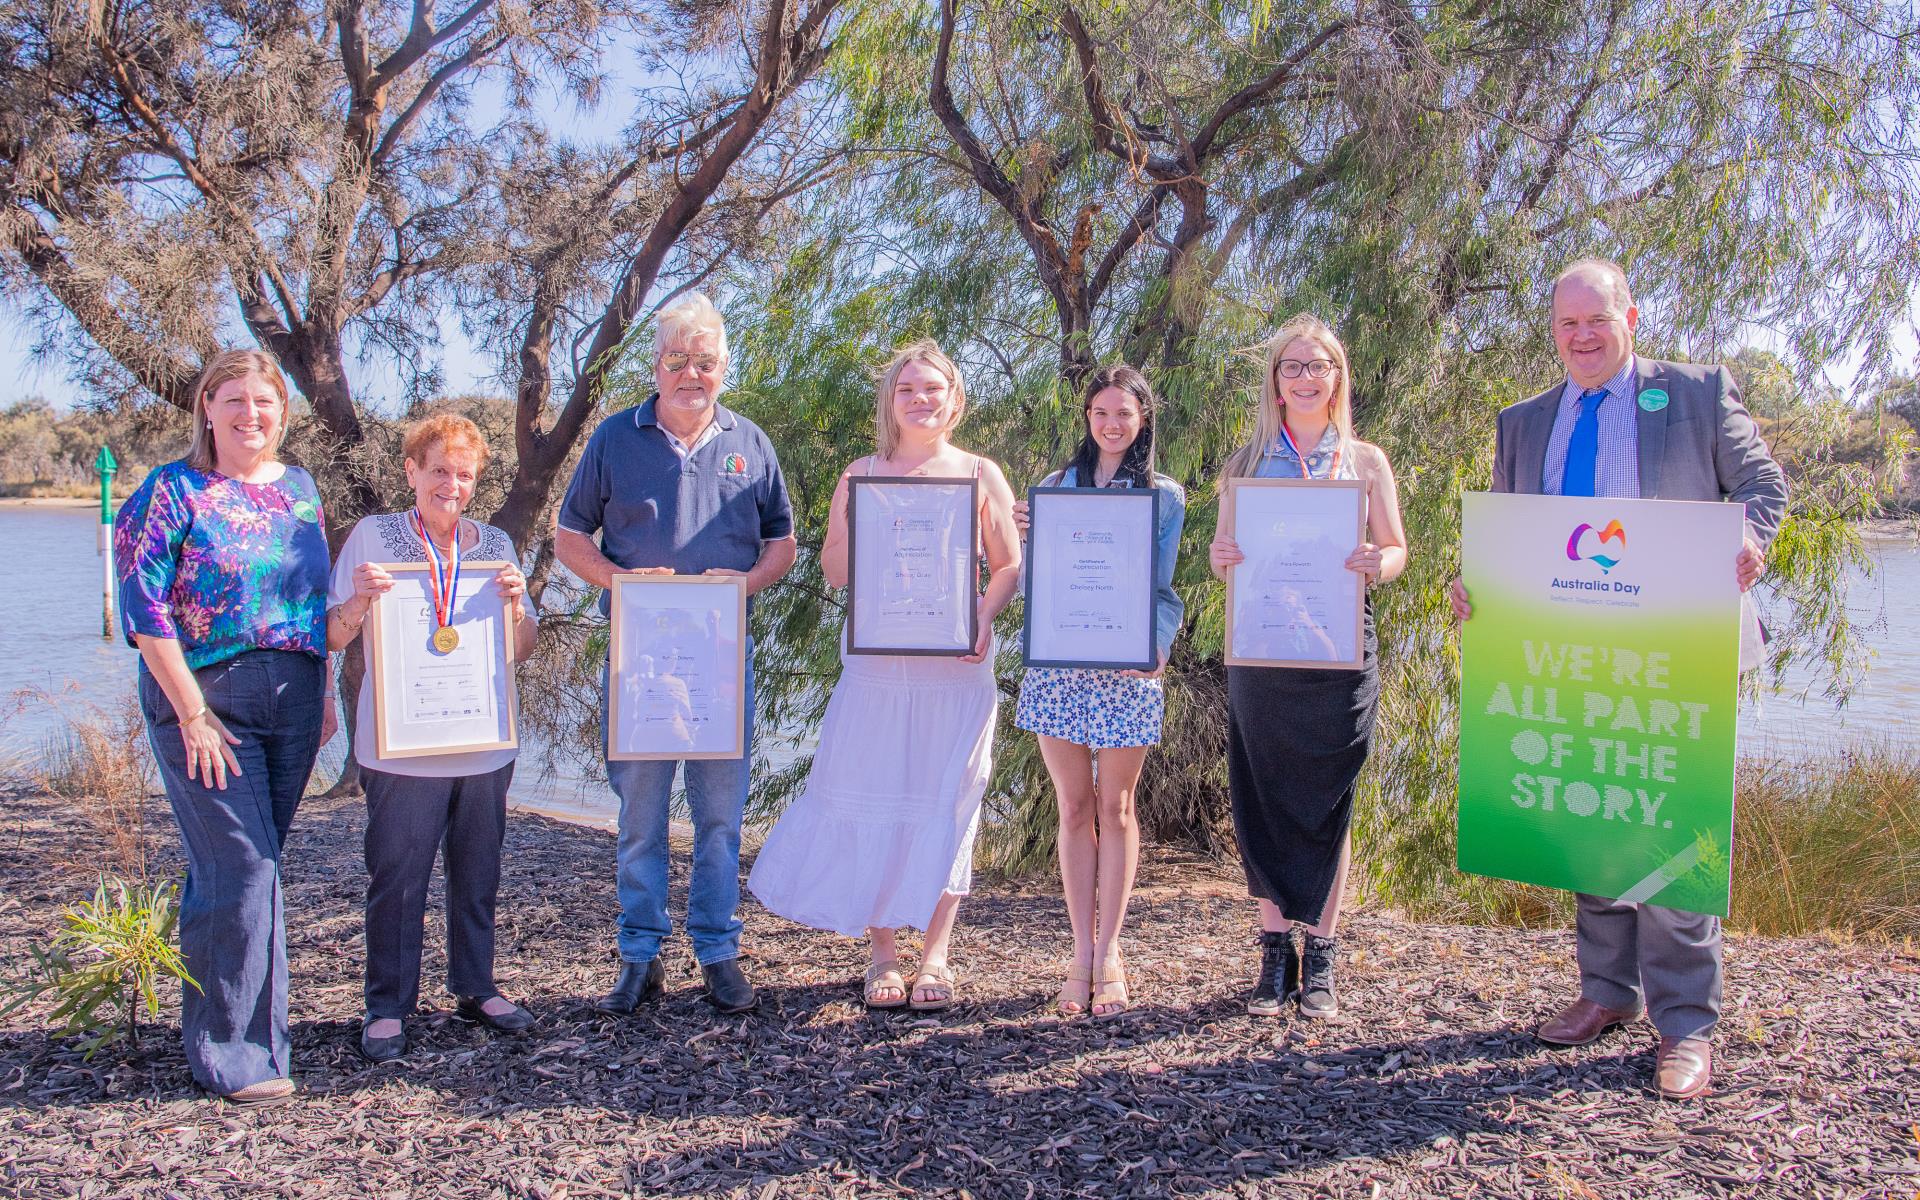 Shire of Dardanup President Cr Tyrrell Gardiner (far right) and Jodie Hanns MLA (far left) with Citizens of the Year Award nominees and recipients (from left) Josephine Holland, Robert Doherty, Shelby Grey, Chelsey North and Kiara Roworth. Absent: Daniel Fry as he was assisting with the Burekup Australia Day Breakfast Event.